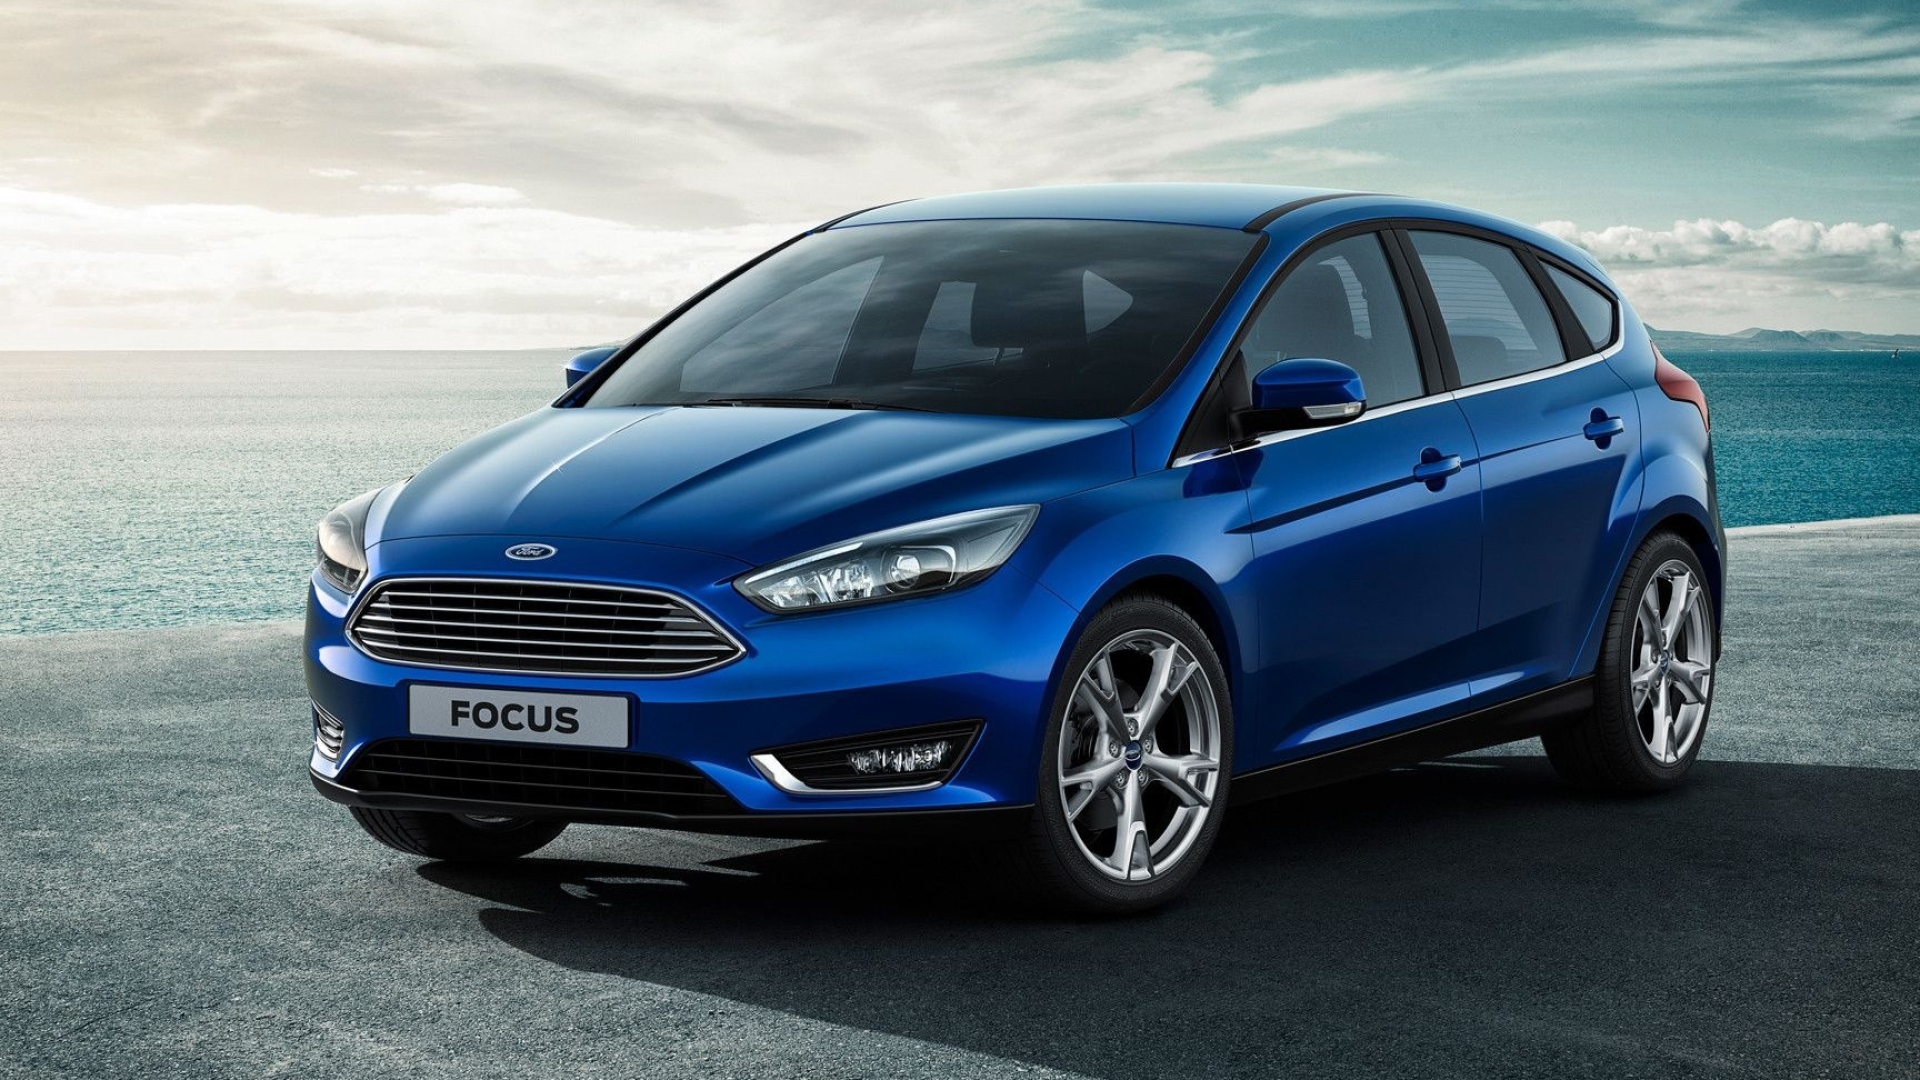 Ford Focus: The fourth-generation ST was announced February 2019. 1920x1080 Full HD Wallpaper.